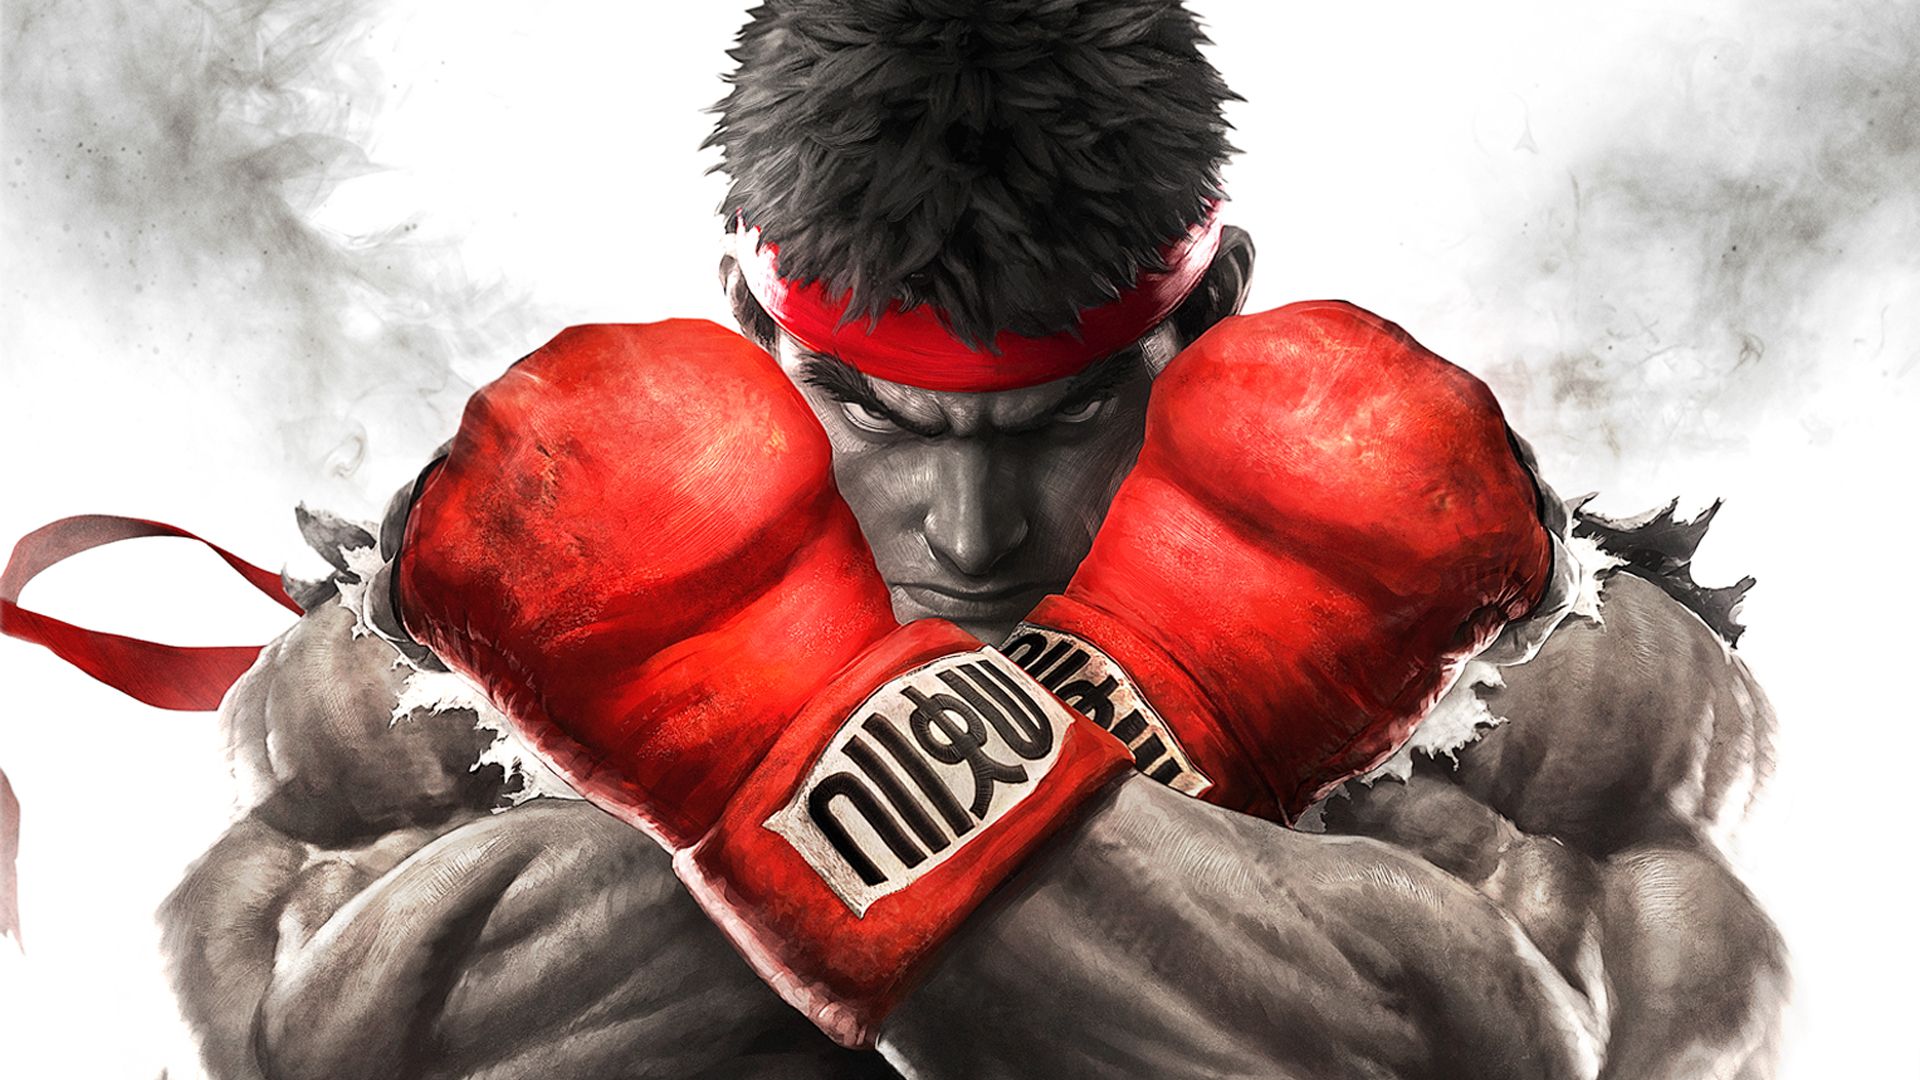 Street Fighter II Video Game HD Wallpapers | HD Wallapers for Free